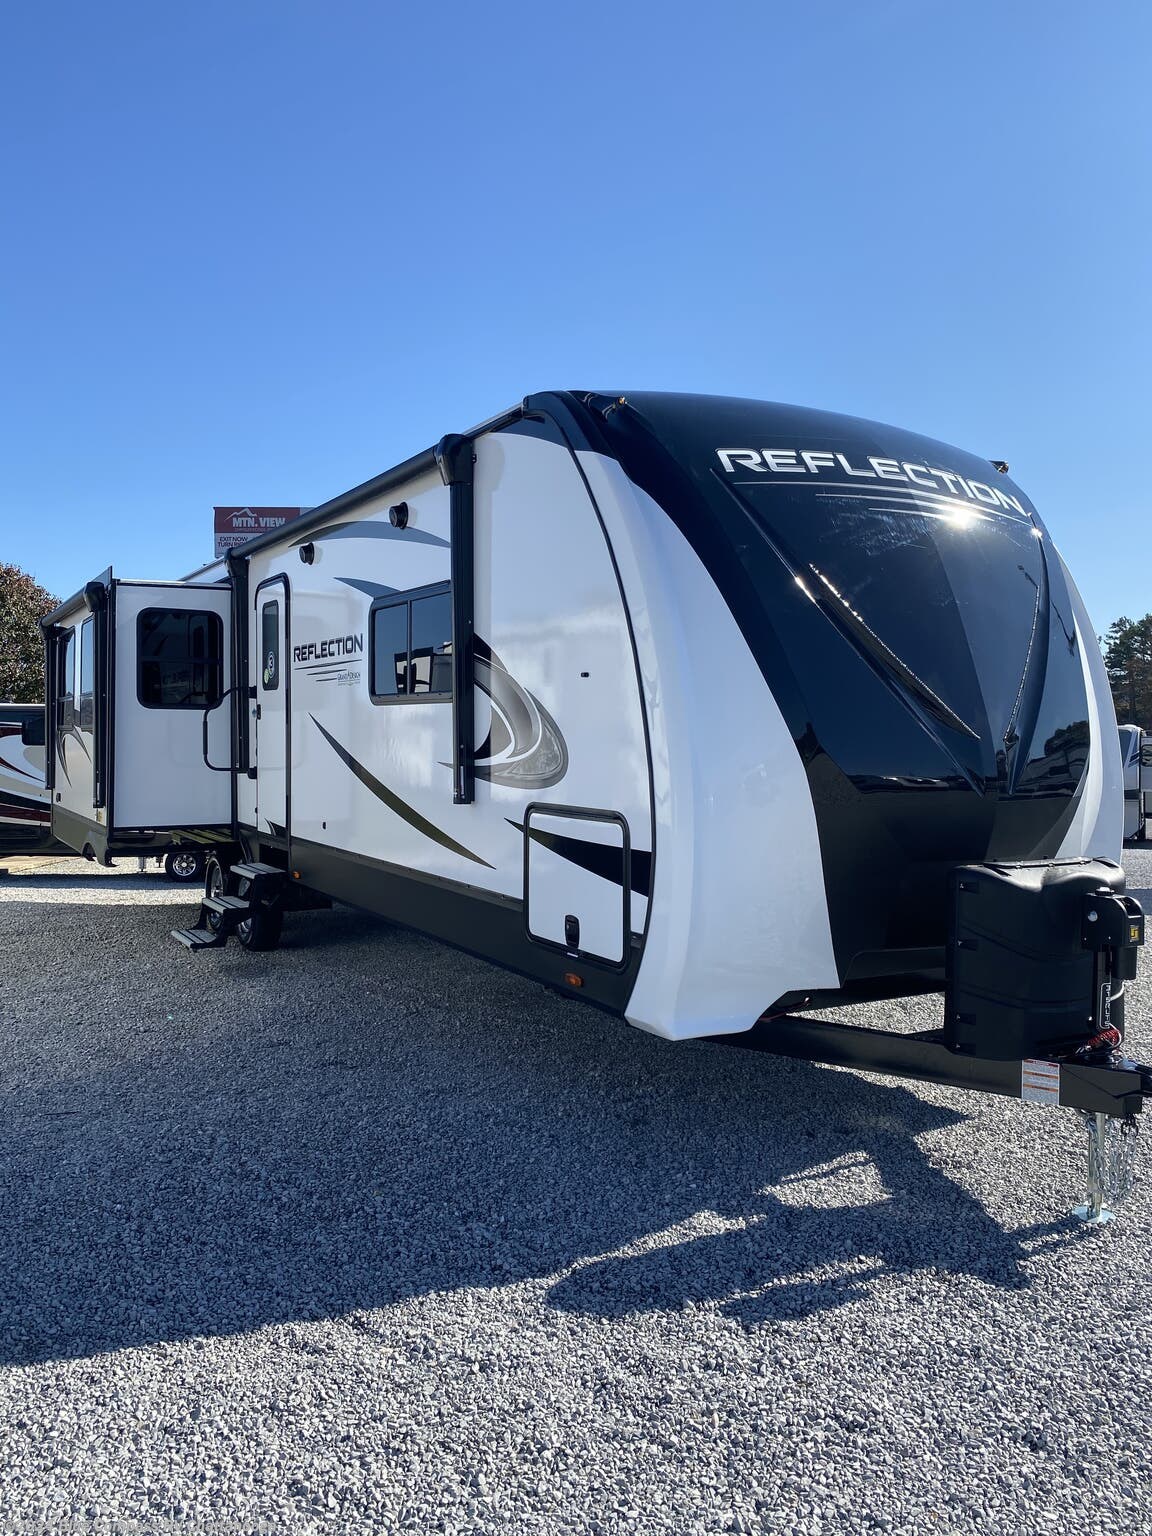 2021 Grand Design Reflection 315RLTS RV for Sale in Ringgold, GA 30736